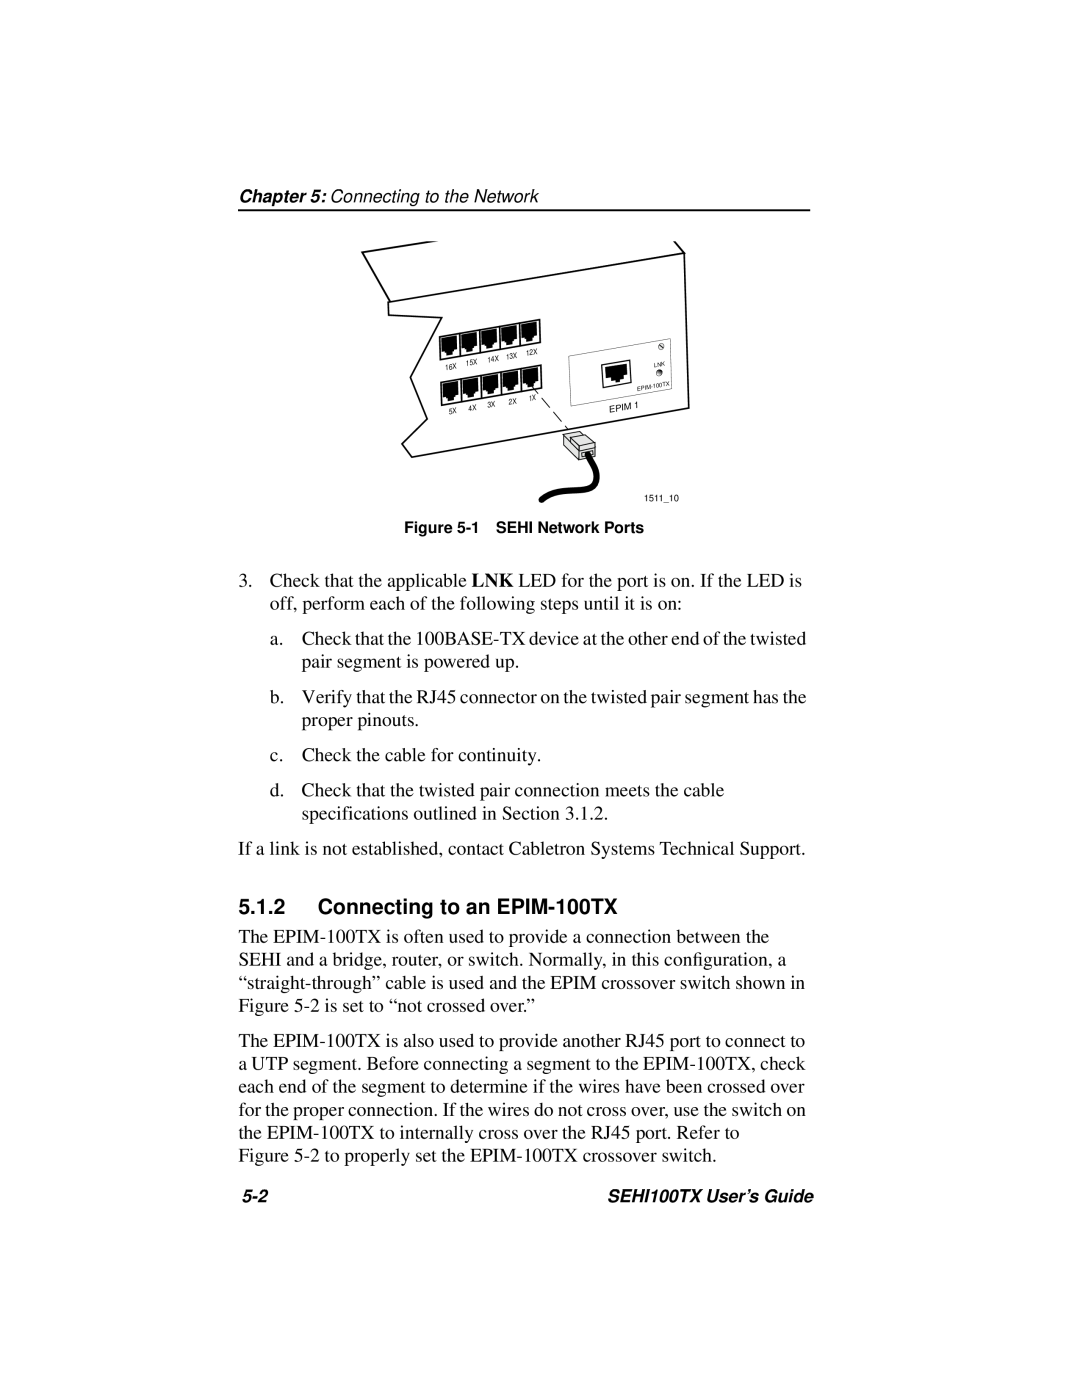 Cabletron Systems SEHI100TX-22 manual Connecting to an EPIM-100TX 